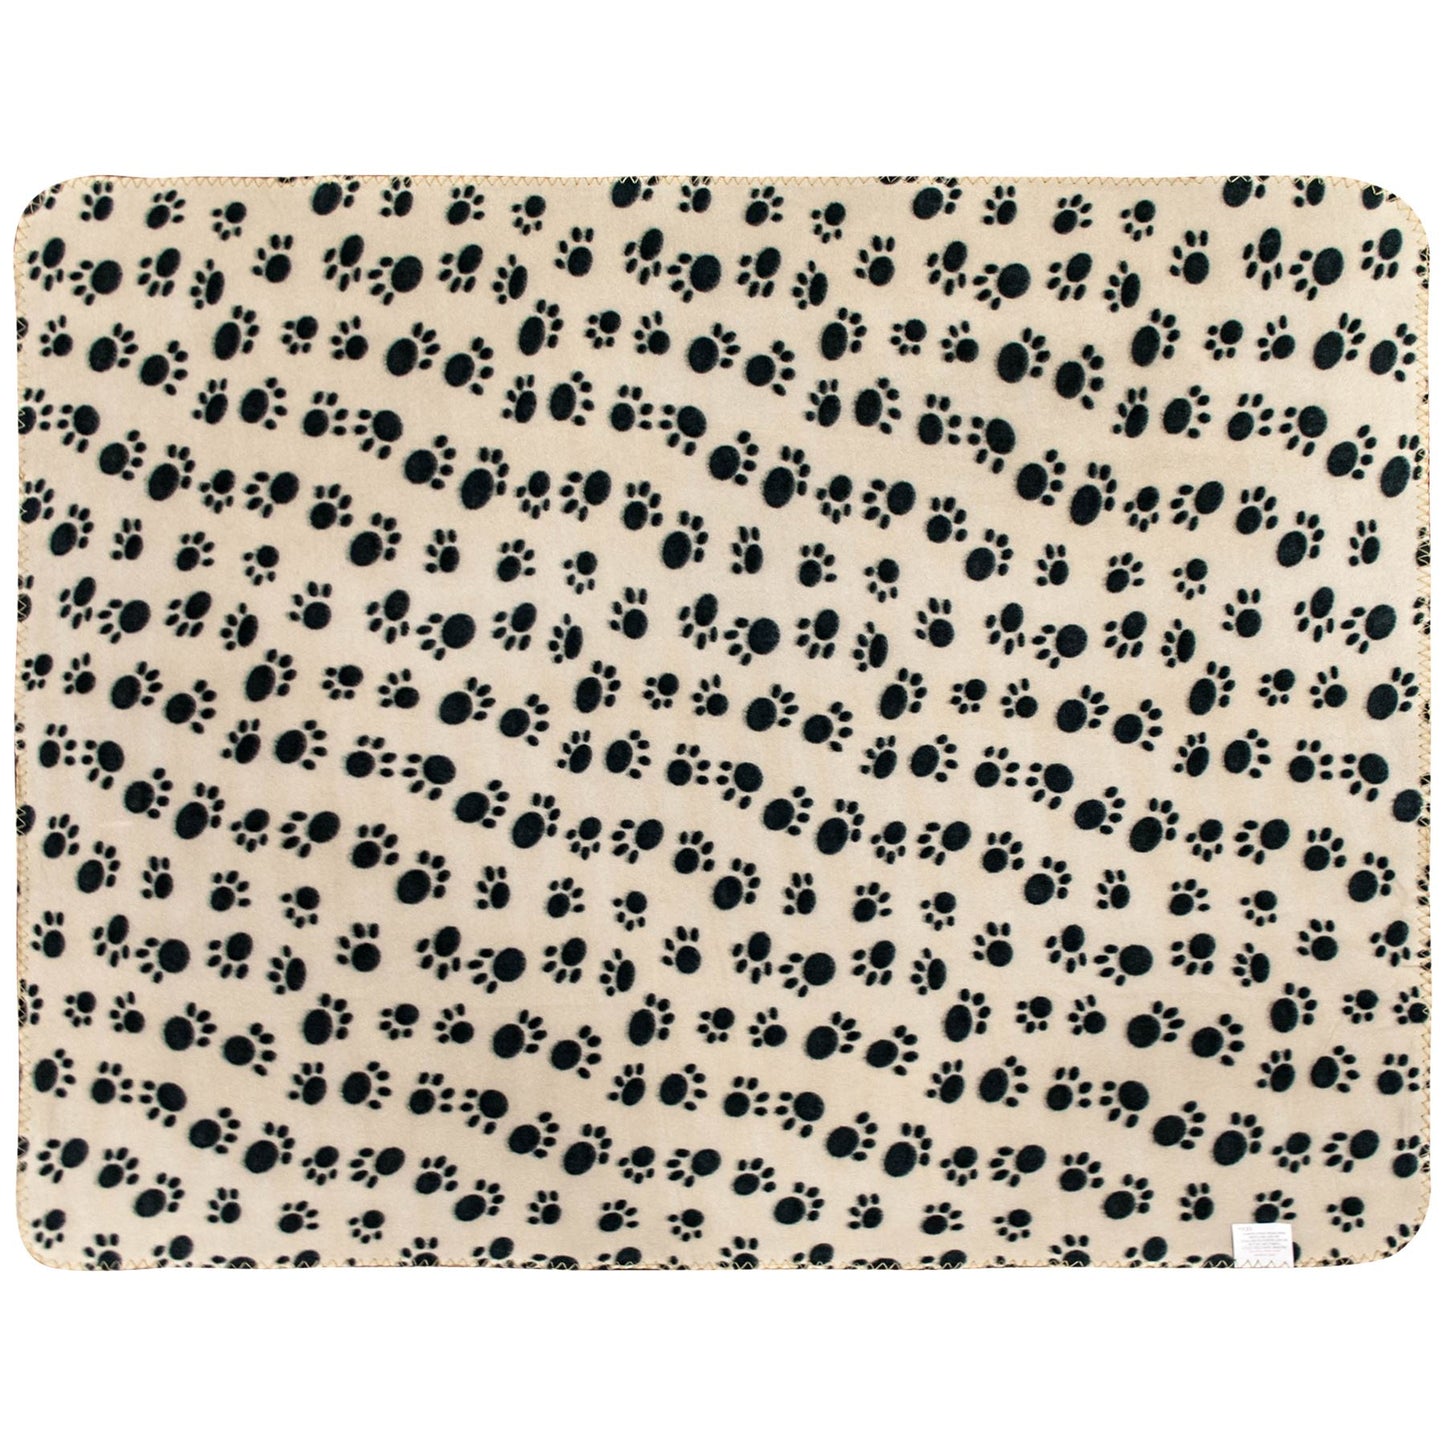 Keep Your Pet Cozy with a Paw Print Fleece Blanket